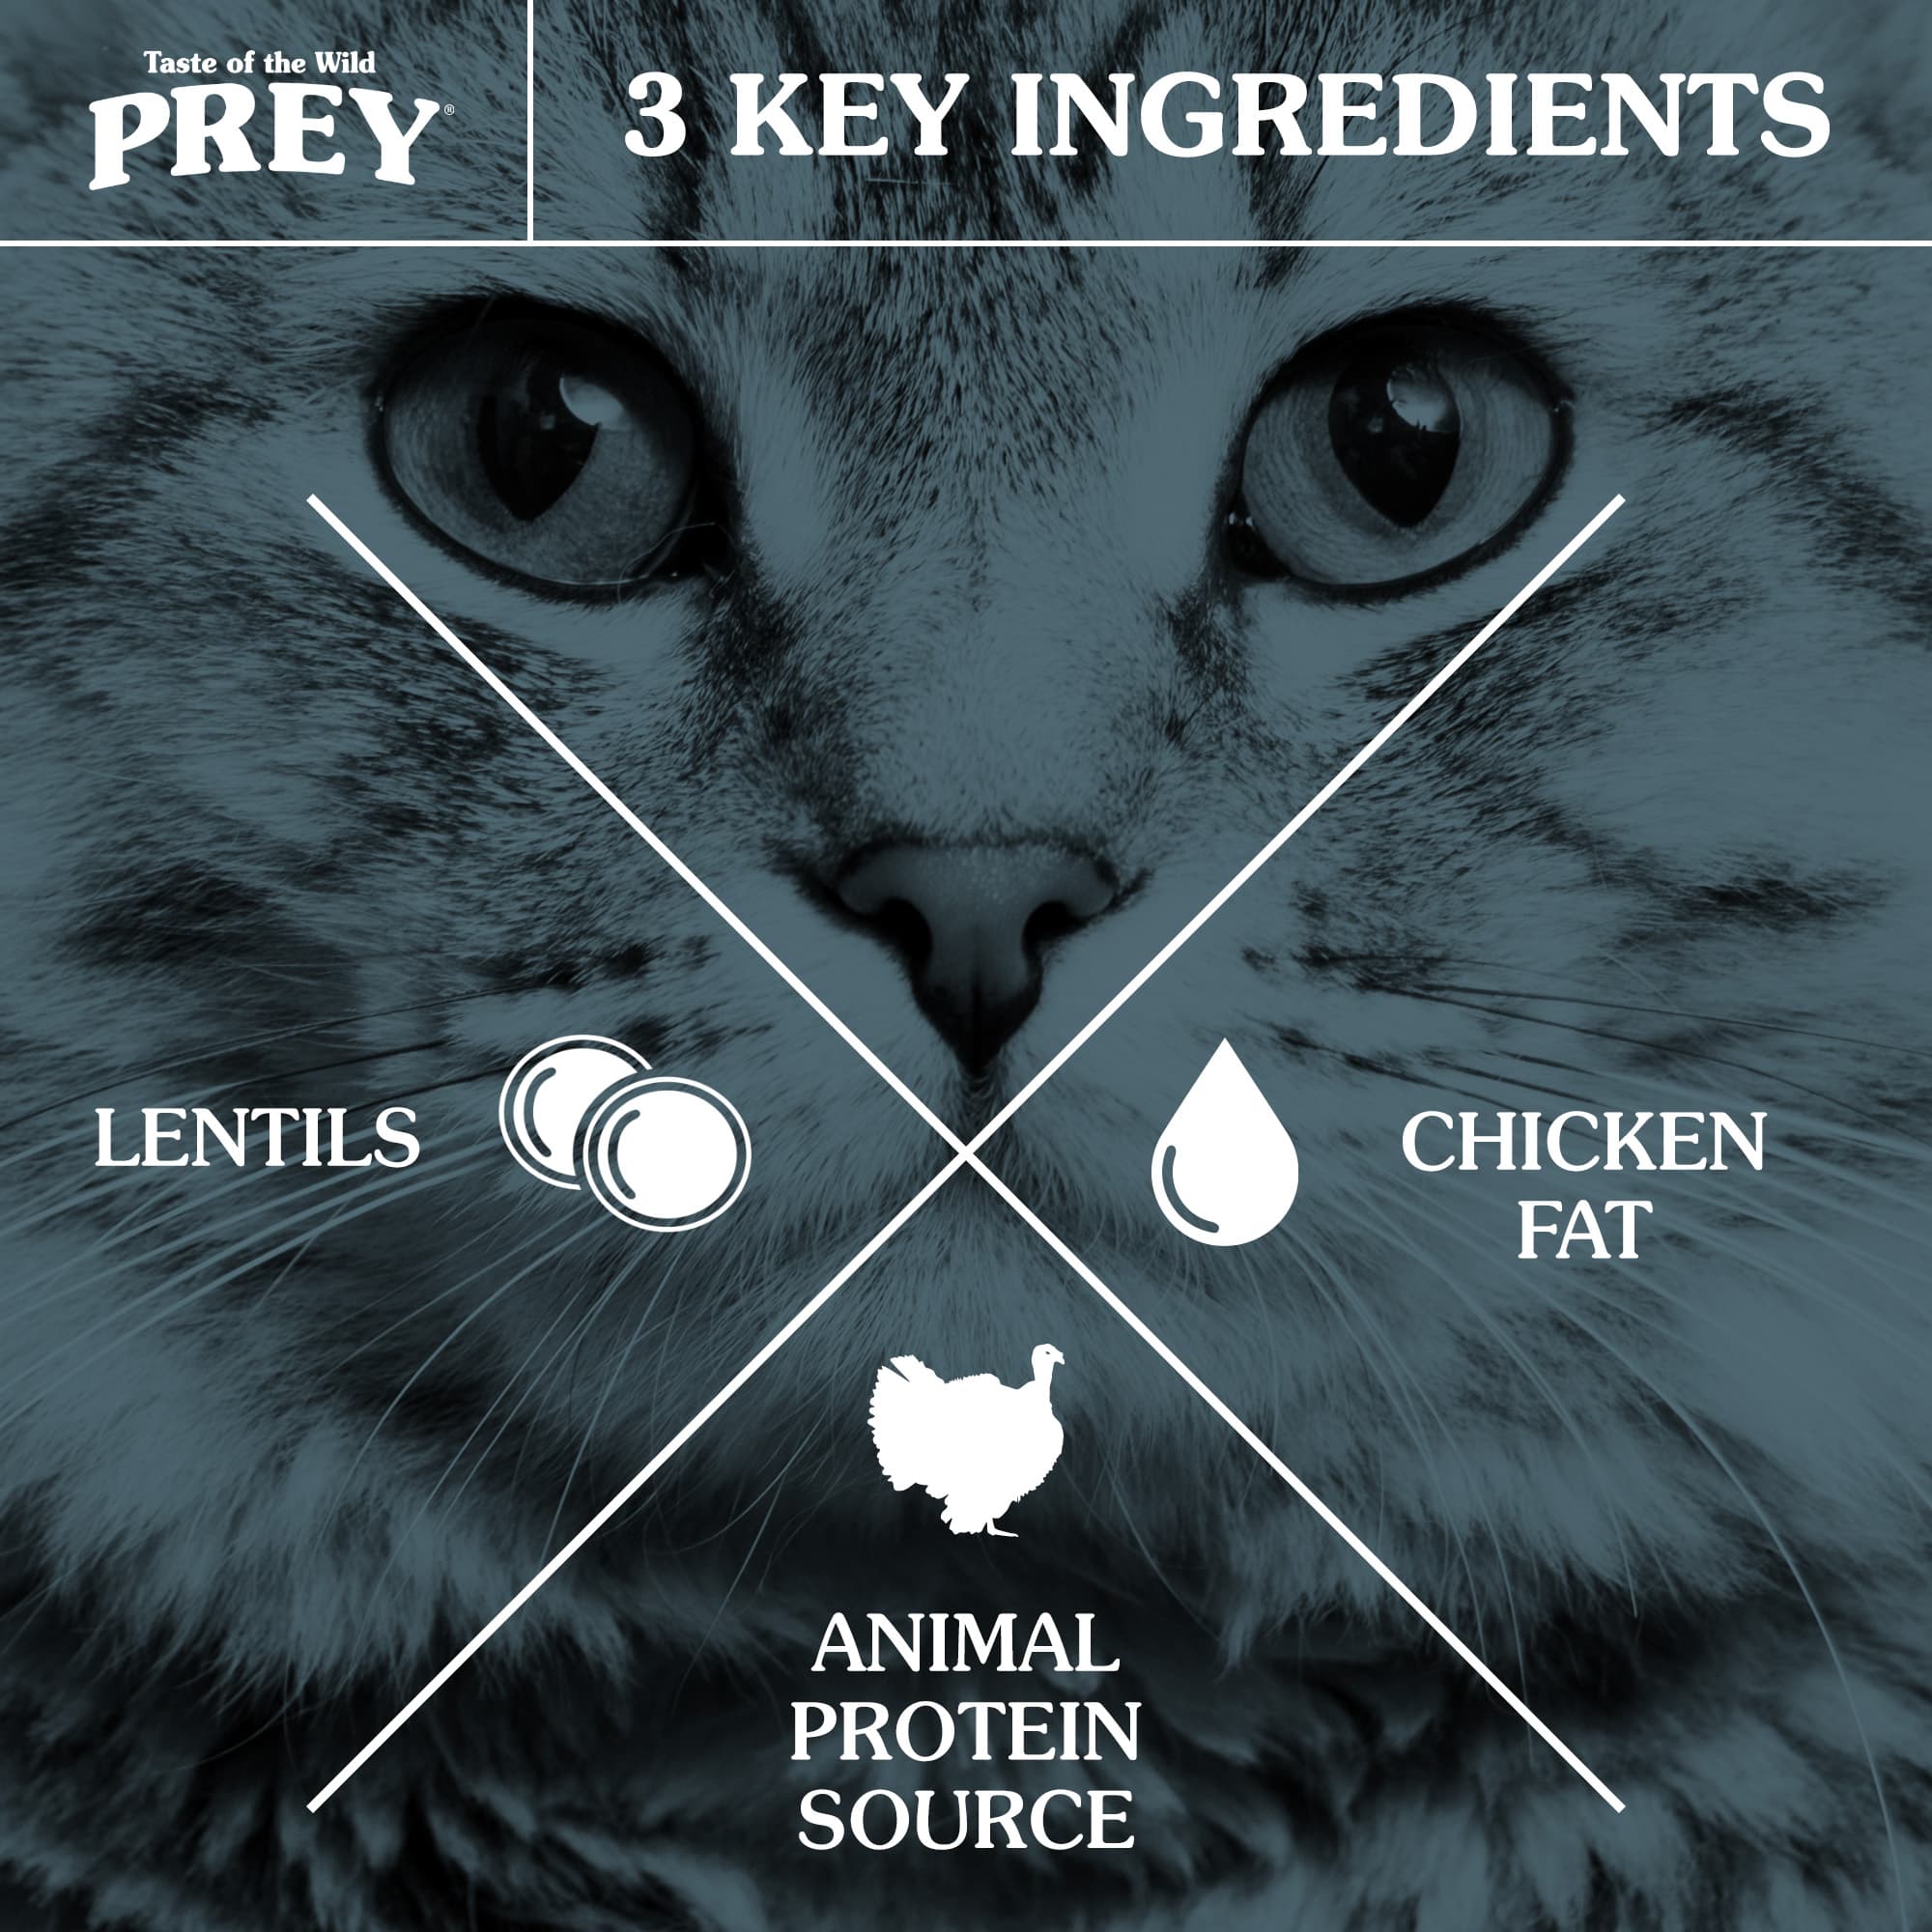 3 Key Ingredients: Animal Protein Source, Chicken Fat and Lentils | Taste of the Wild